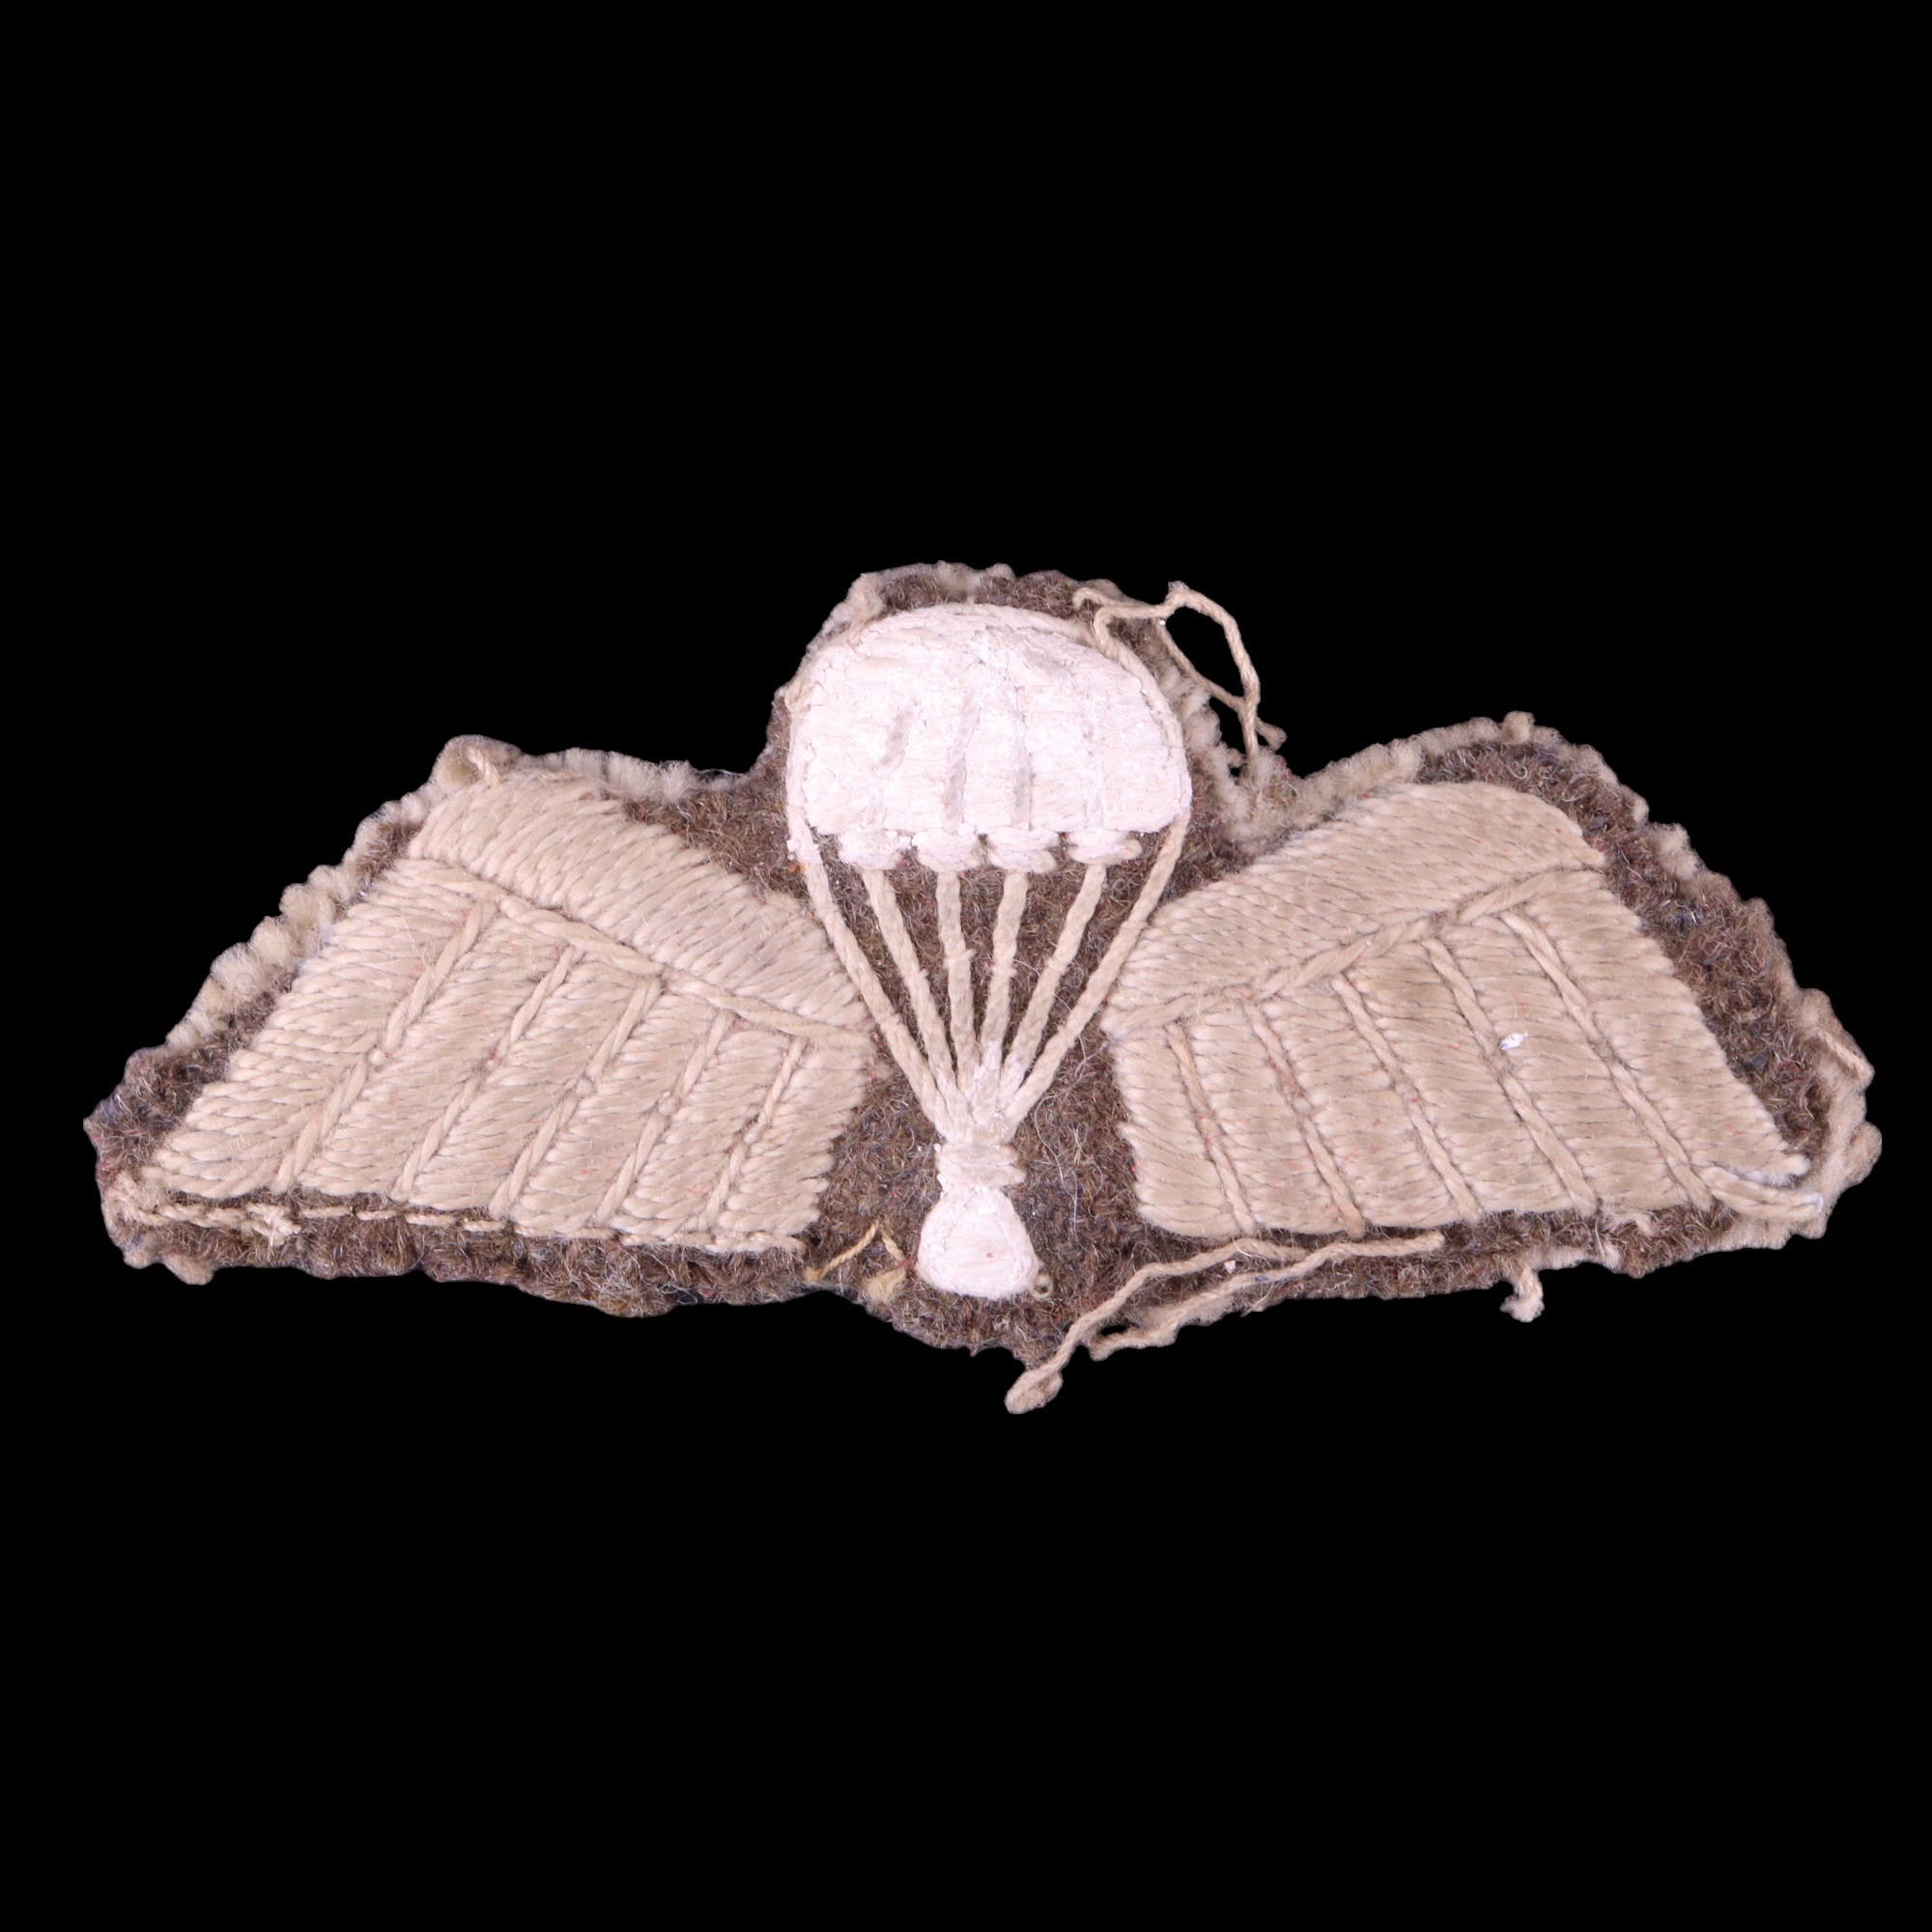 A set of early Second World War / Far East Theatre British / Indian Army parachute wings